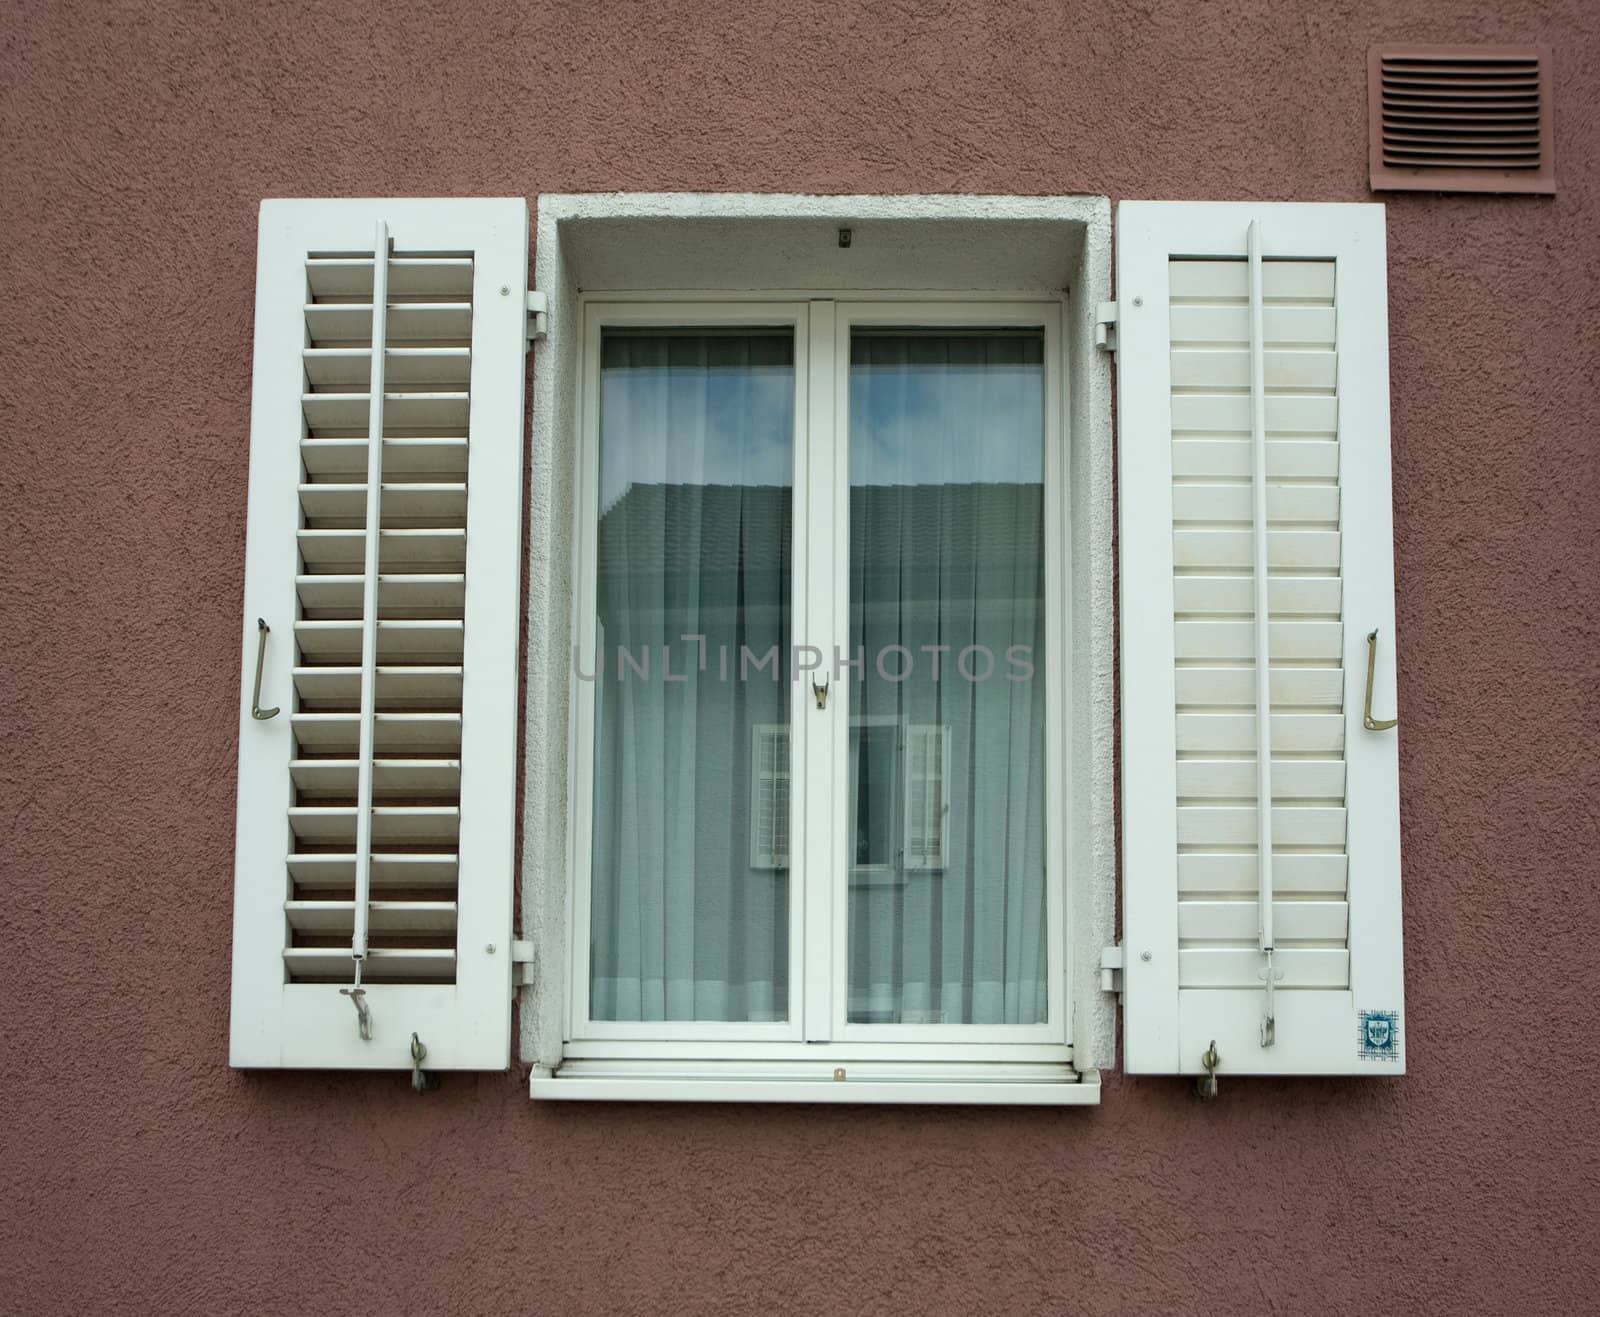 An image of a window with jalousie